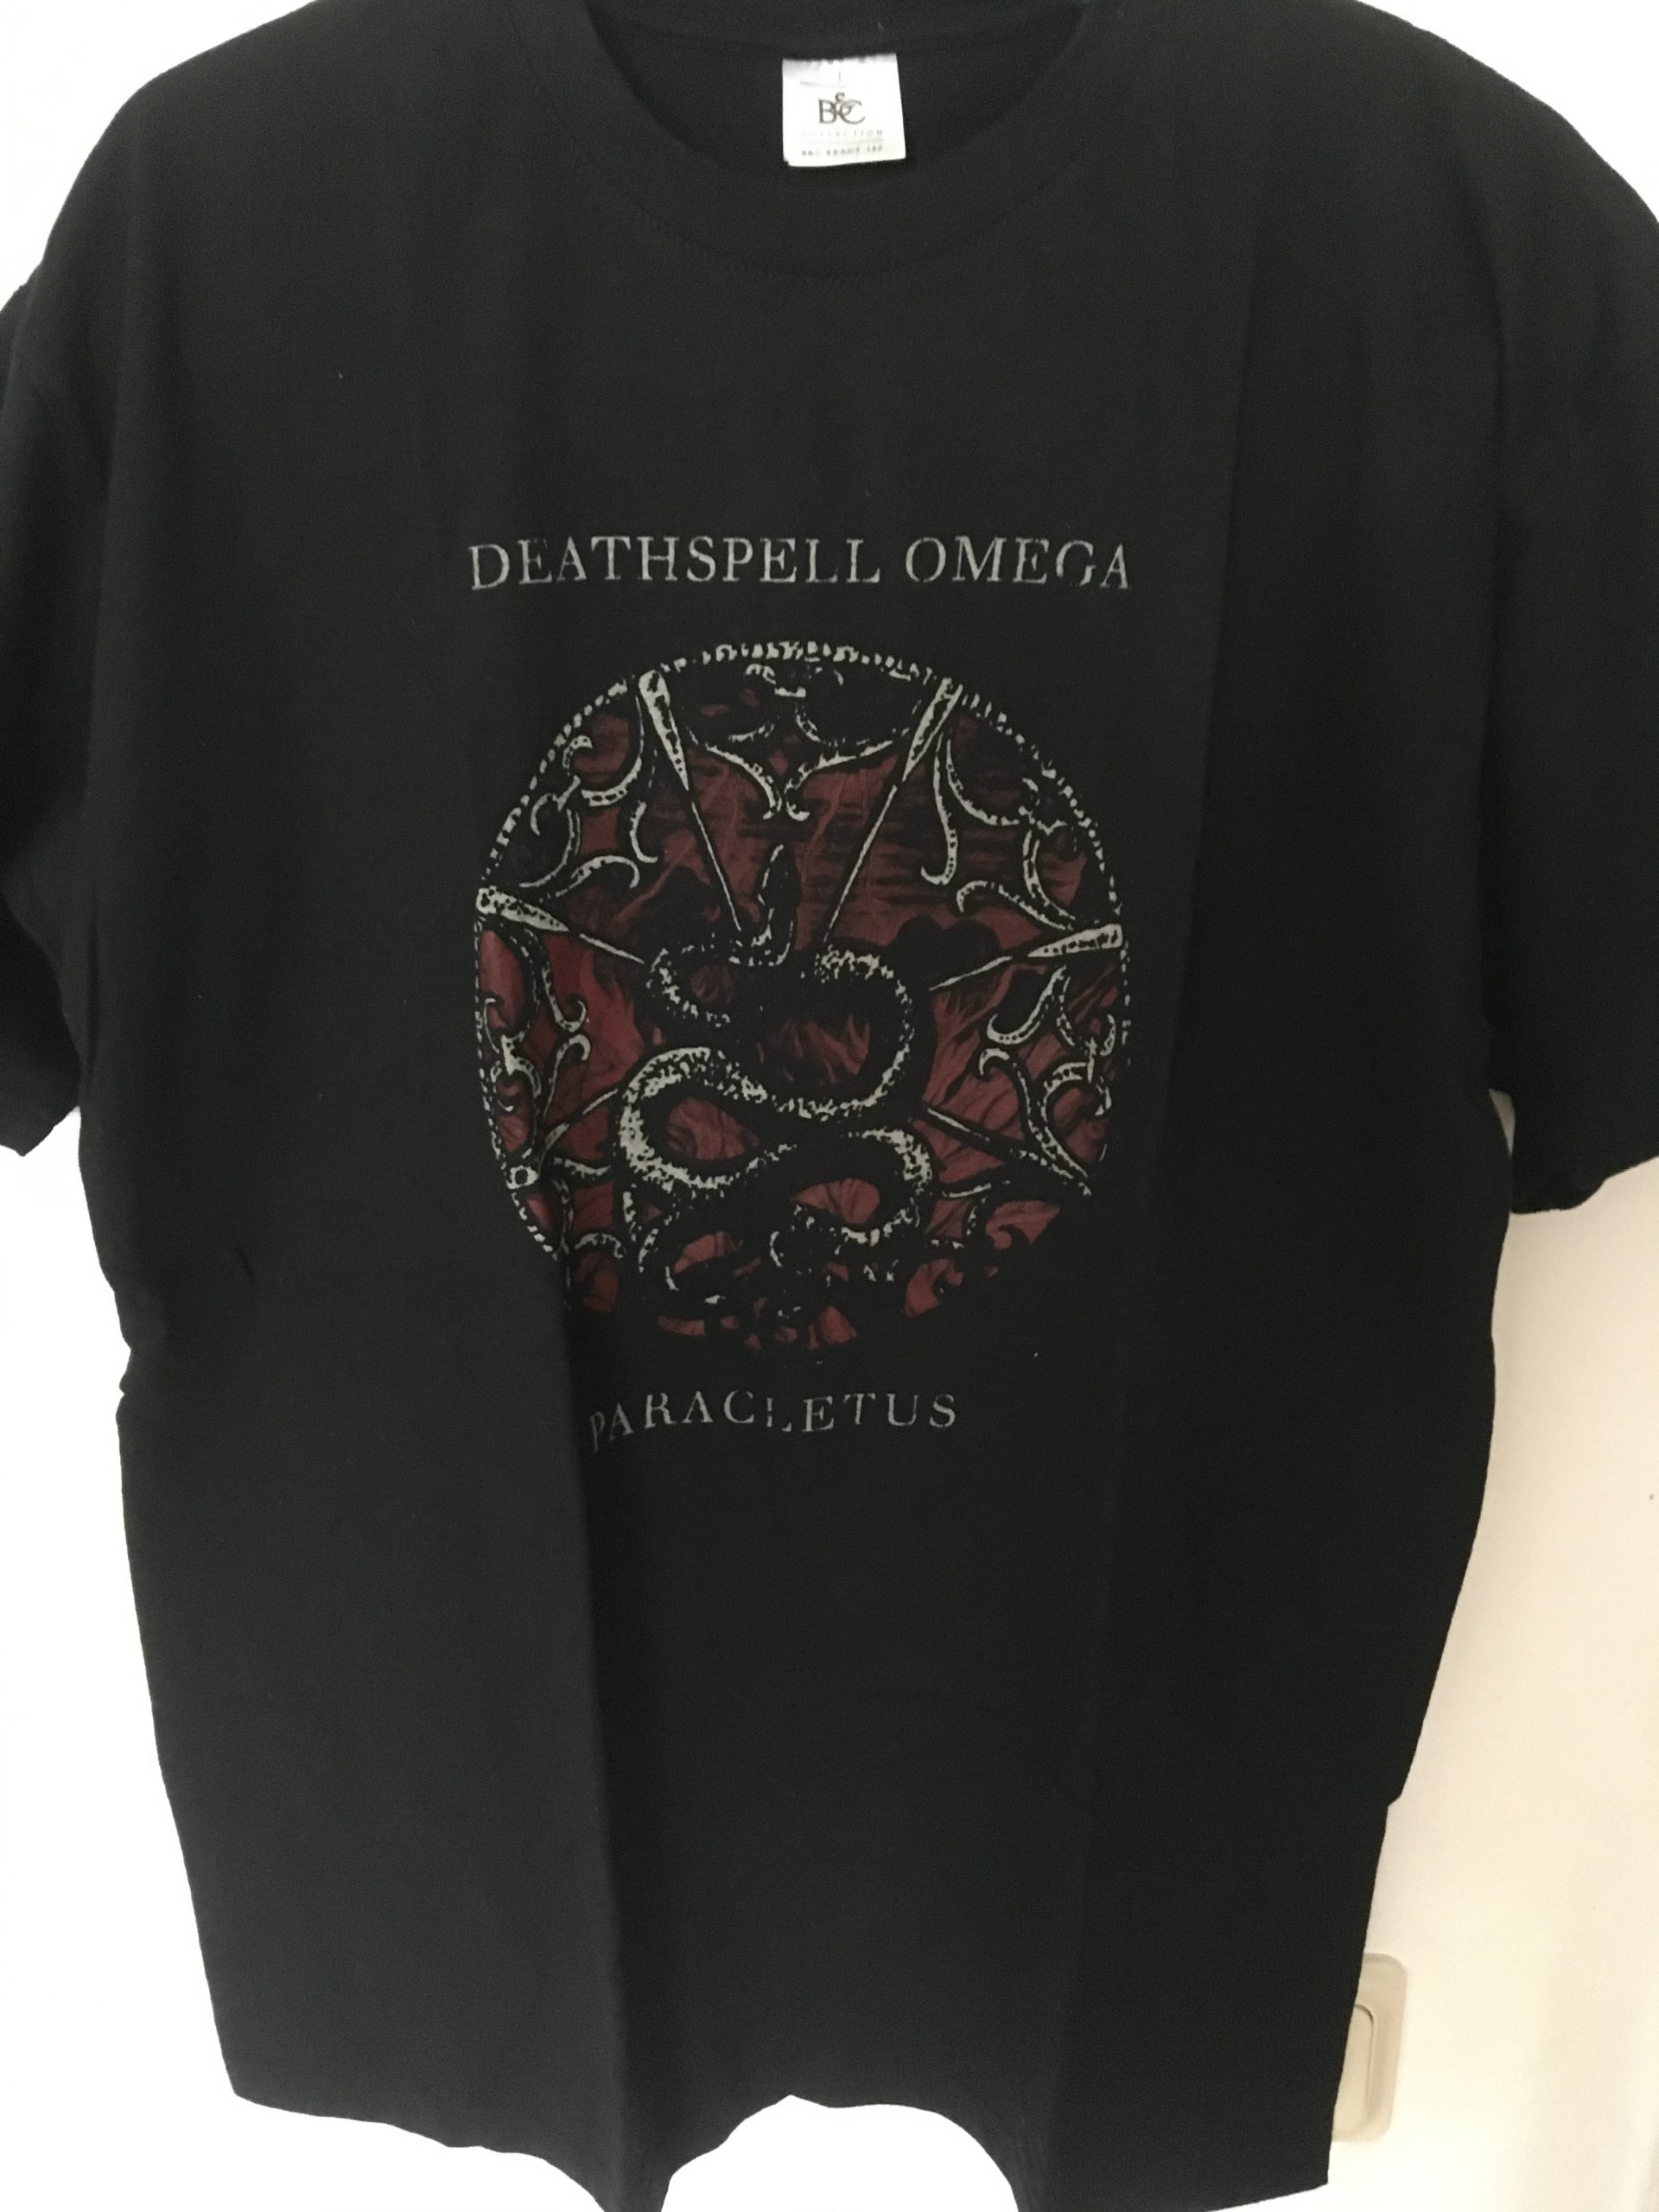 Deathspell Omega - Paracletus II Shirt front